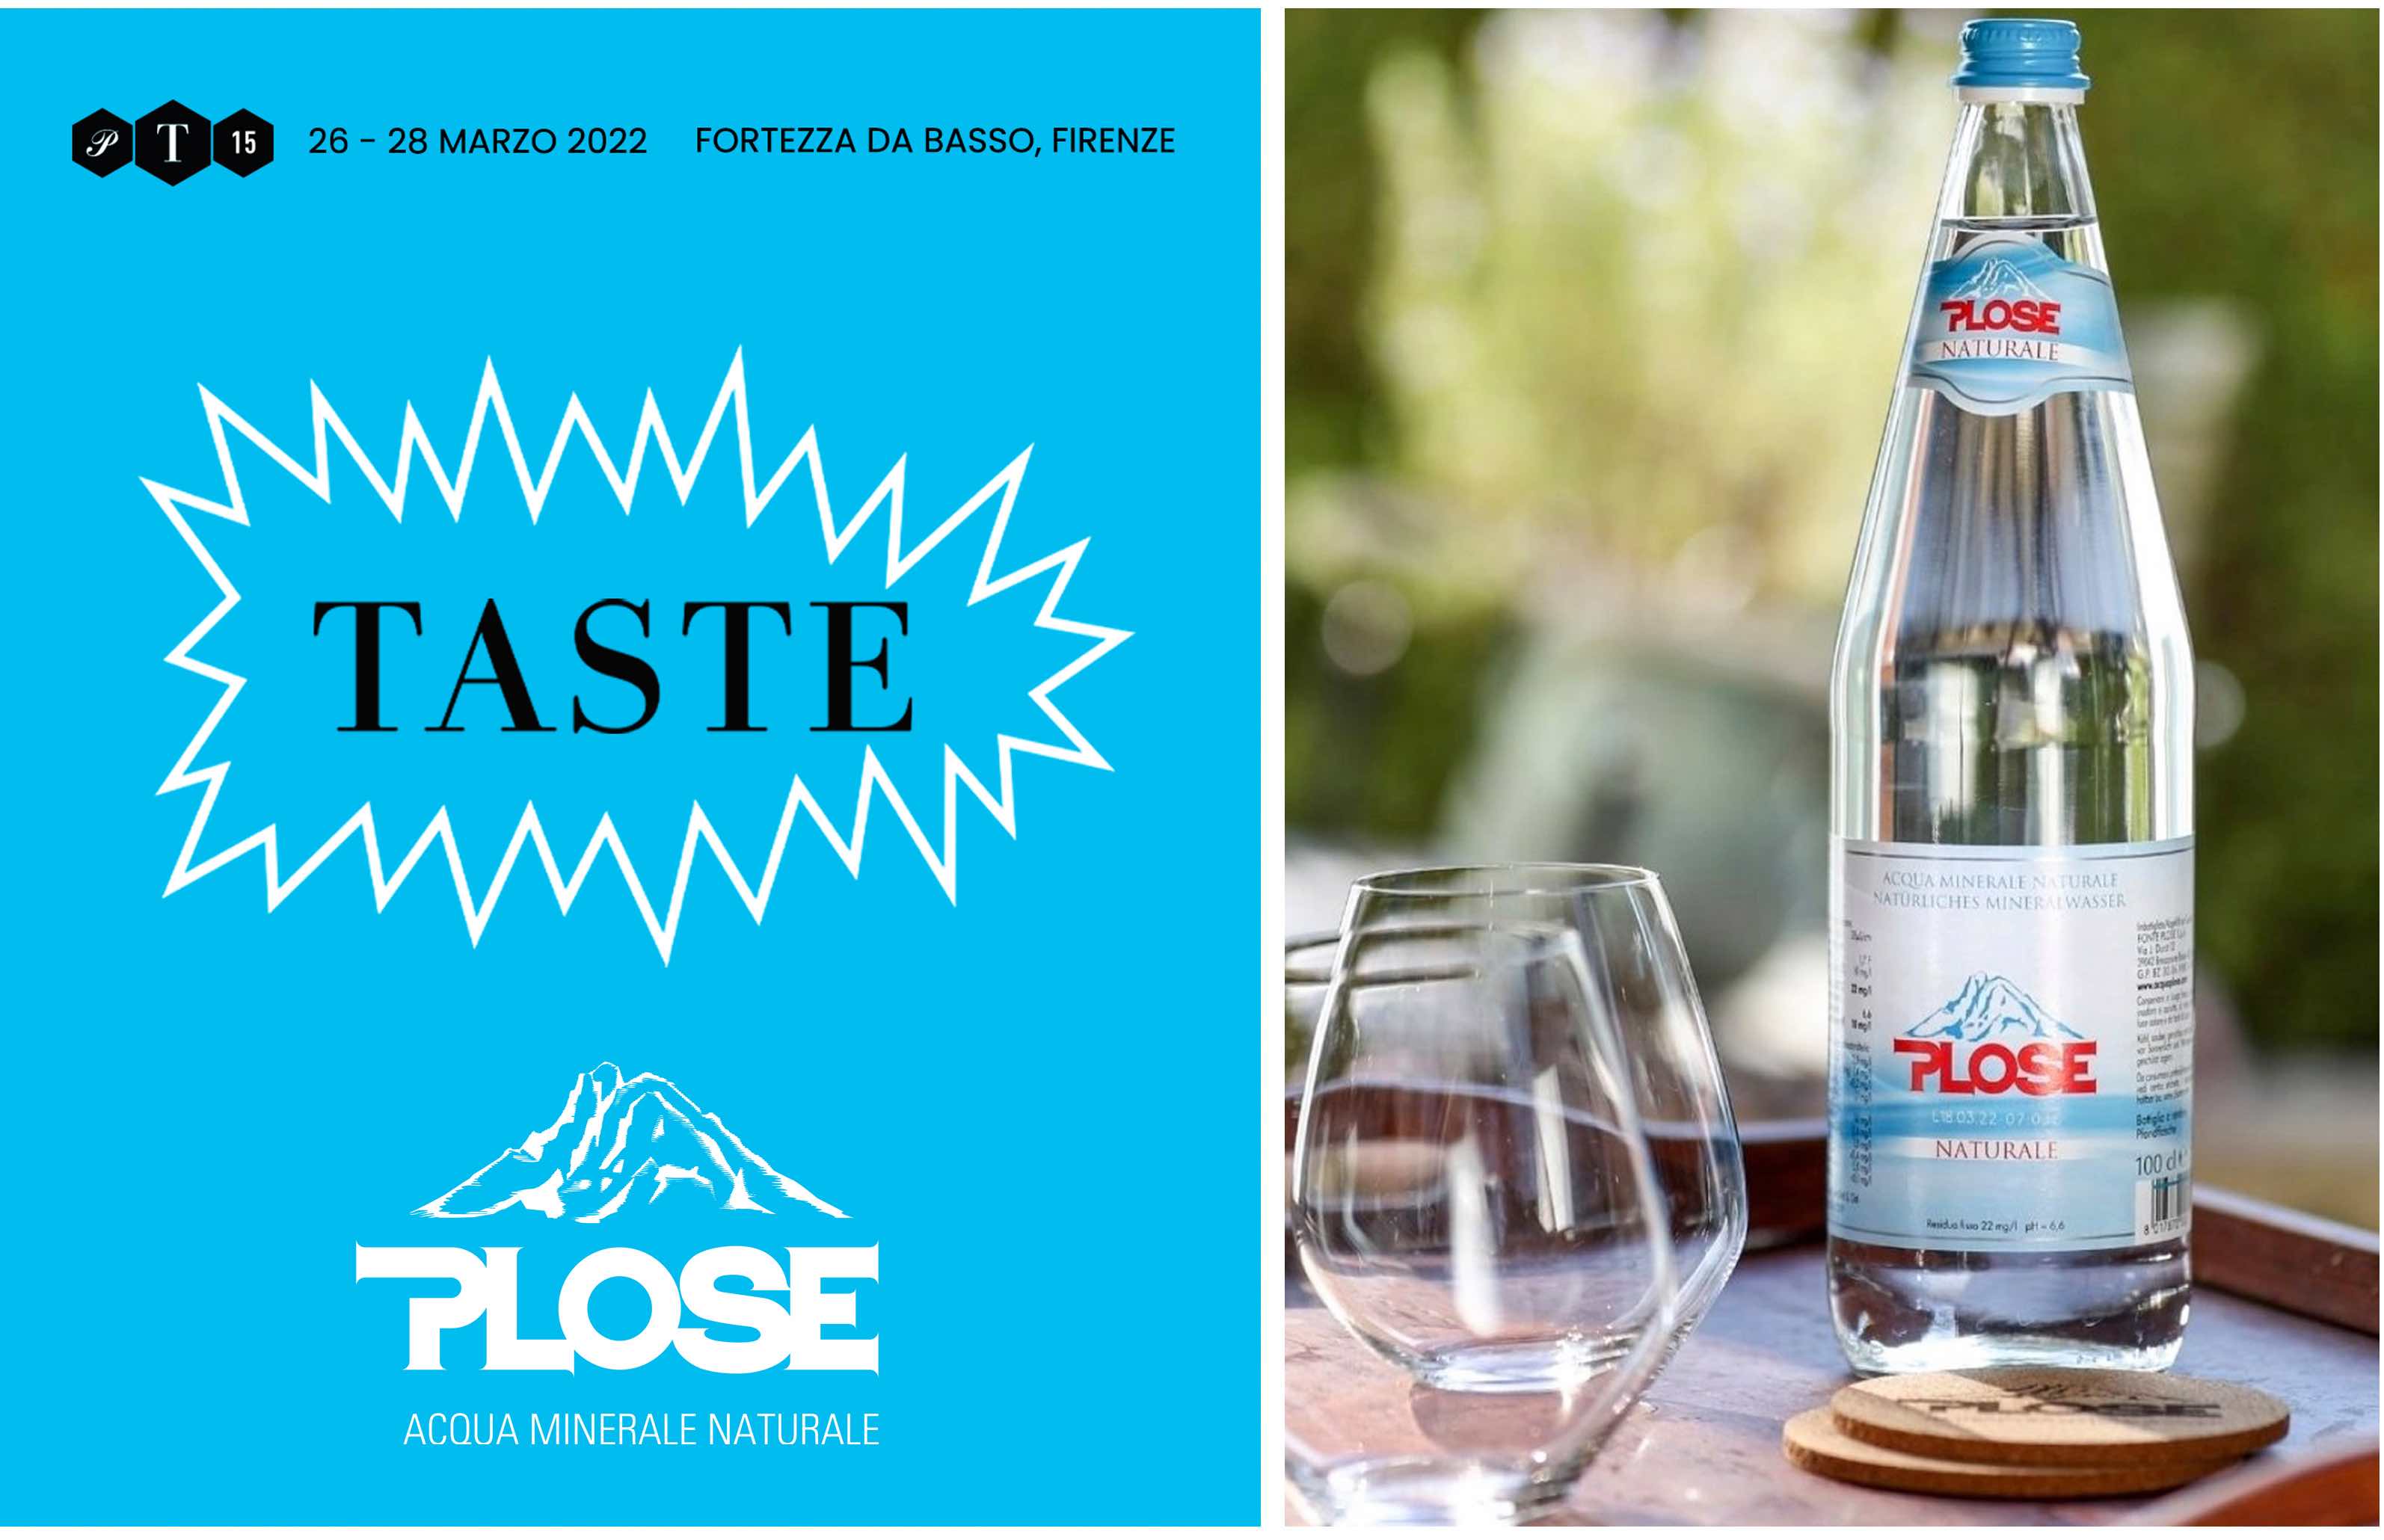 Fonte Plose arriva a Pitti Taste e a Beer&Food Attraction